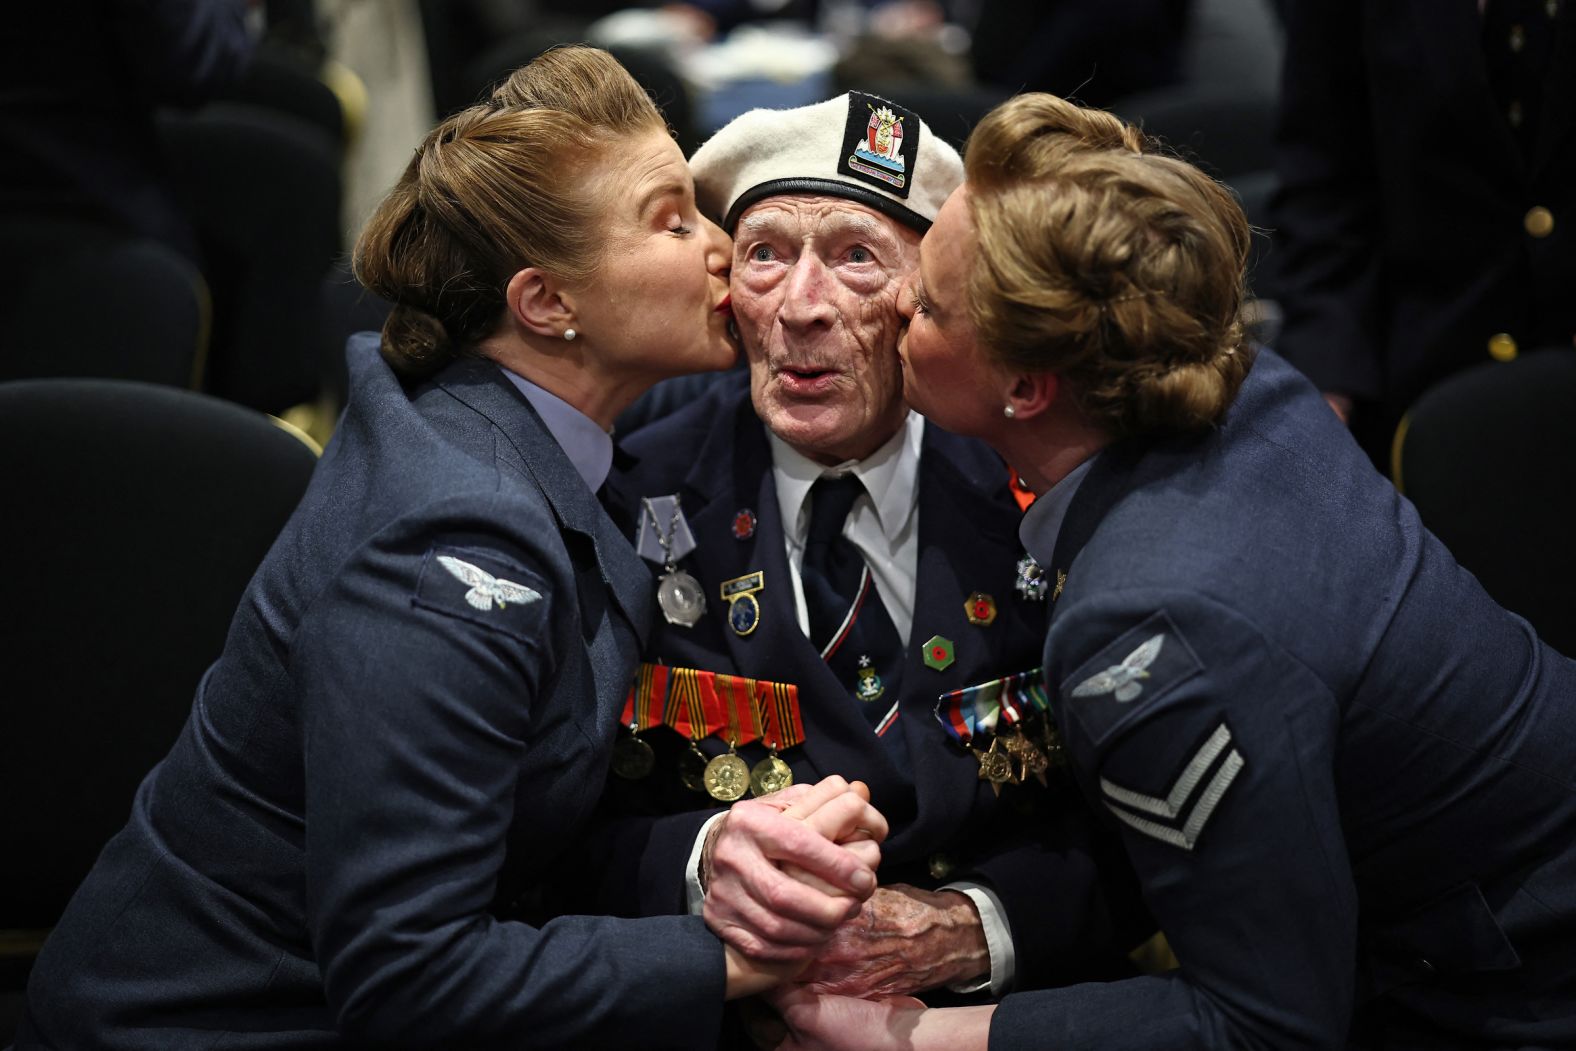 D-Day veteran Alec Penstone receives a kiss from two members of the D-Day Darlings, a song and dance group, during an event in London on Friday, April 26. This year marks the 80th anniversary of D-Day, the Allied amphibious landing that eventually led to victory in World War II.